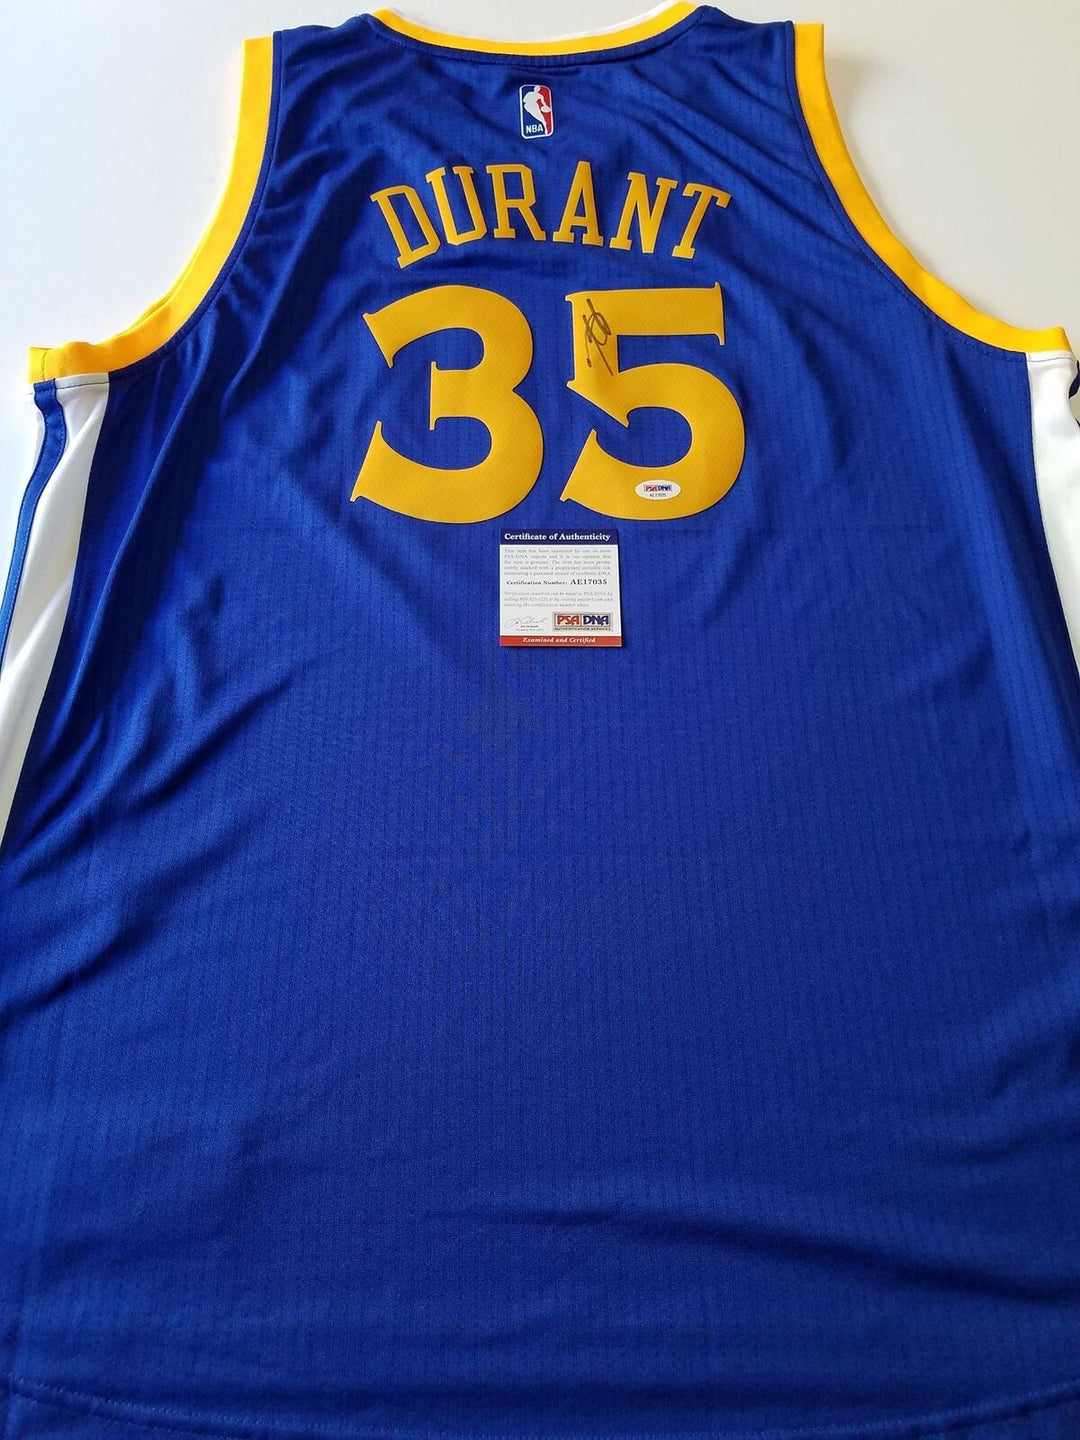 Kevin Durant signed jersey PSA/DNA Golden State Warriors Autographed Image 1